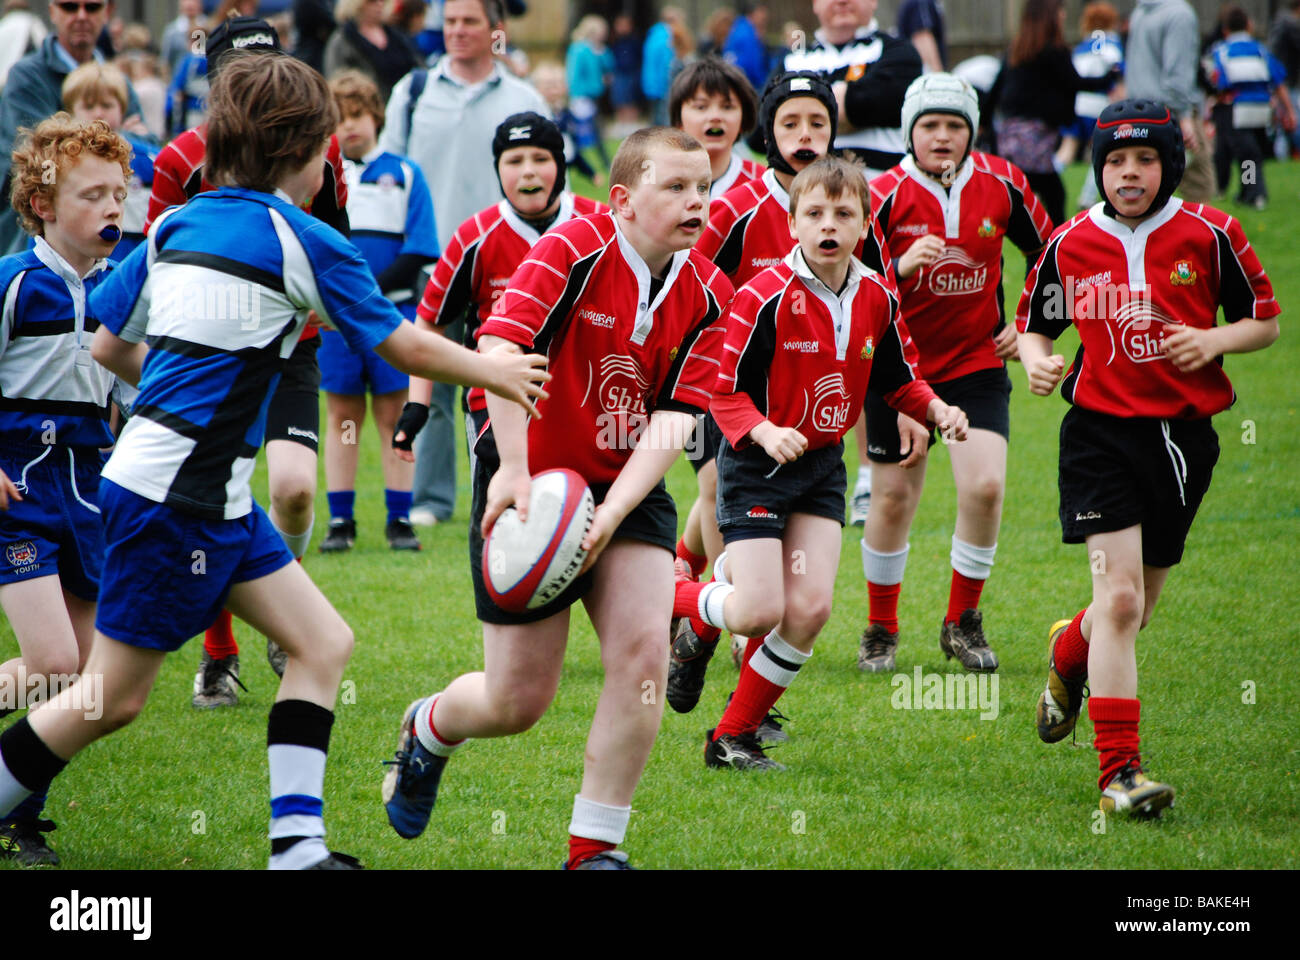 young boys playing rugby Stock Photo